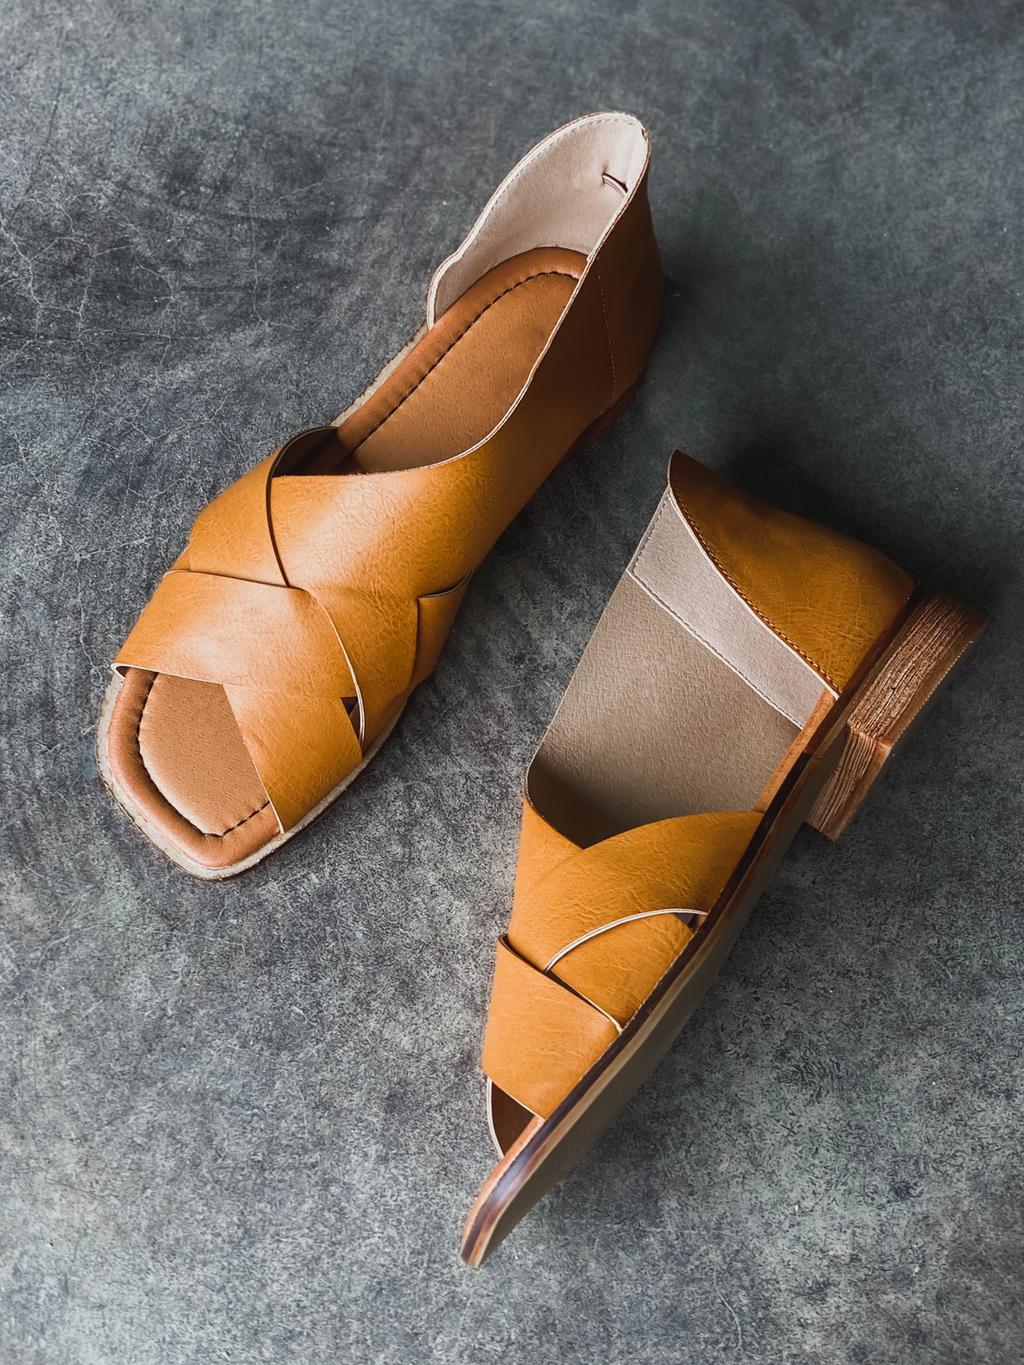 Anni Peep Toe Sandal in Mustard - Final Sale - Stitch And Feather